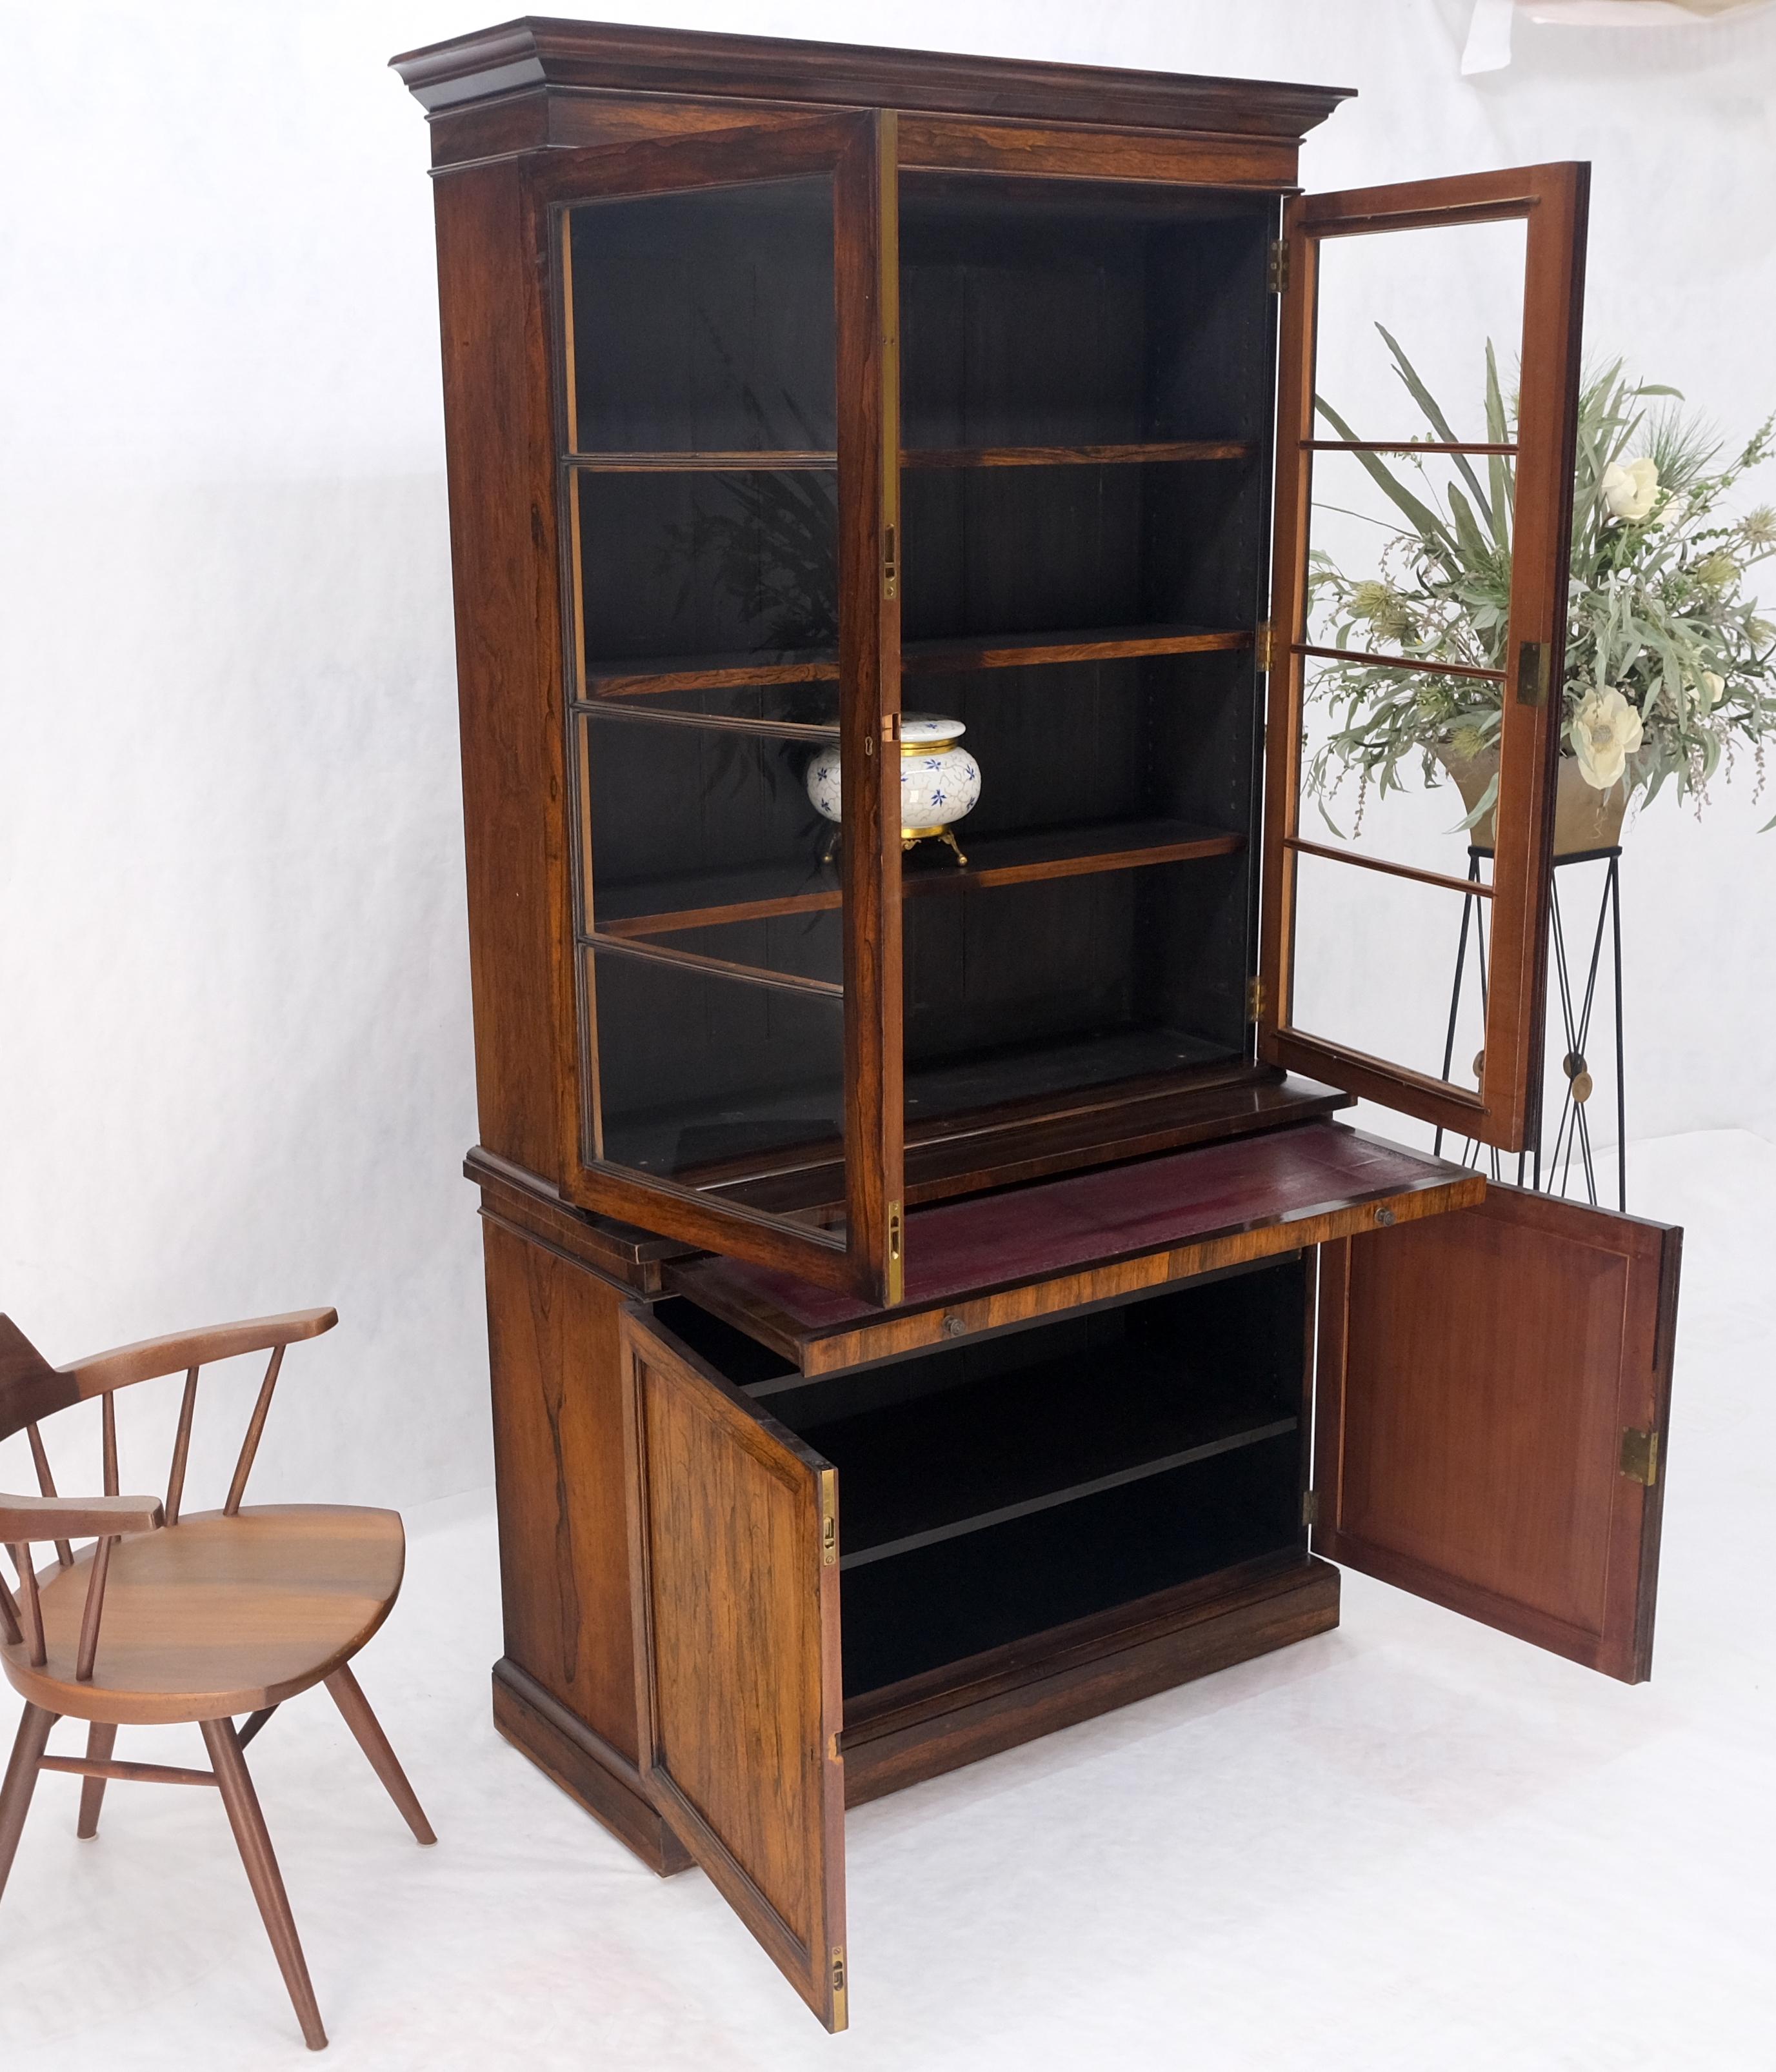 All Rosewood Double Glass Doors Adjustable Shelves Pull Out Leather Top Desk Secretary MINT!